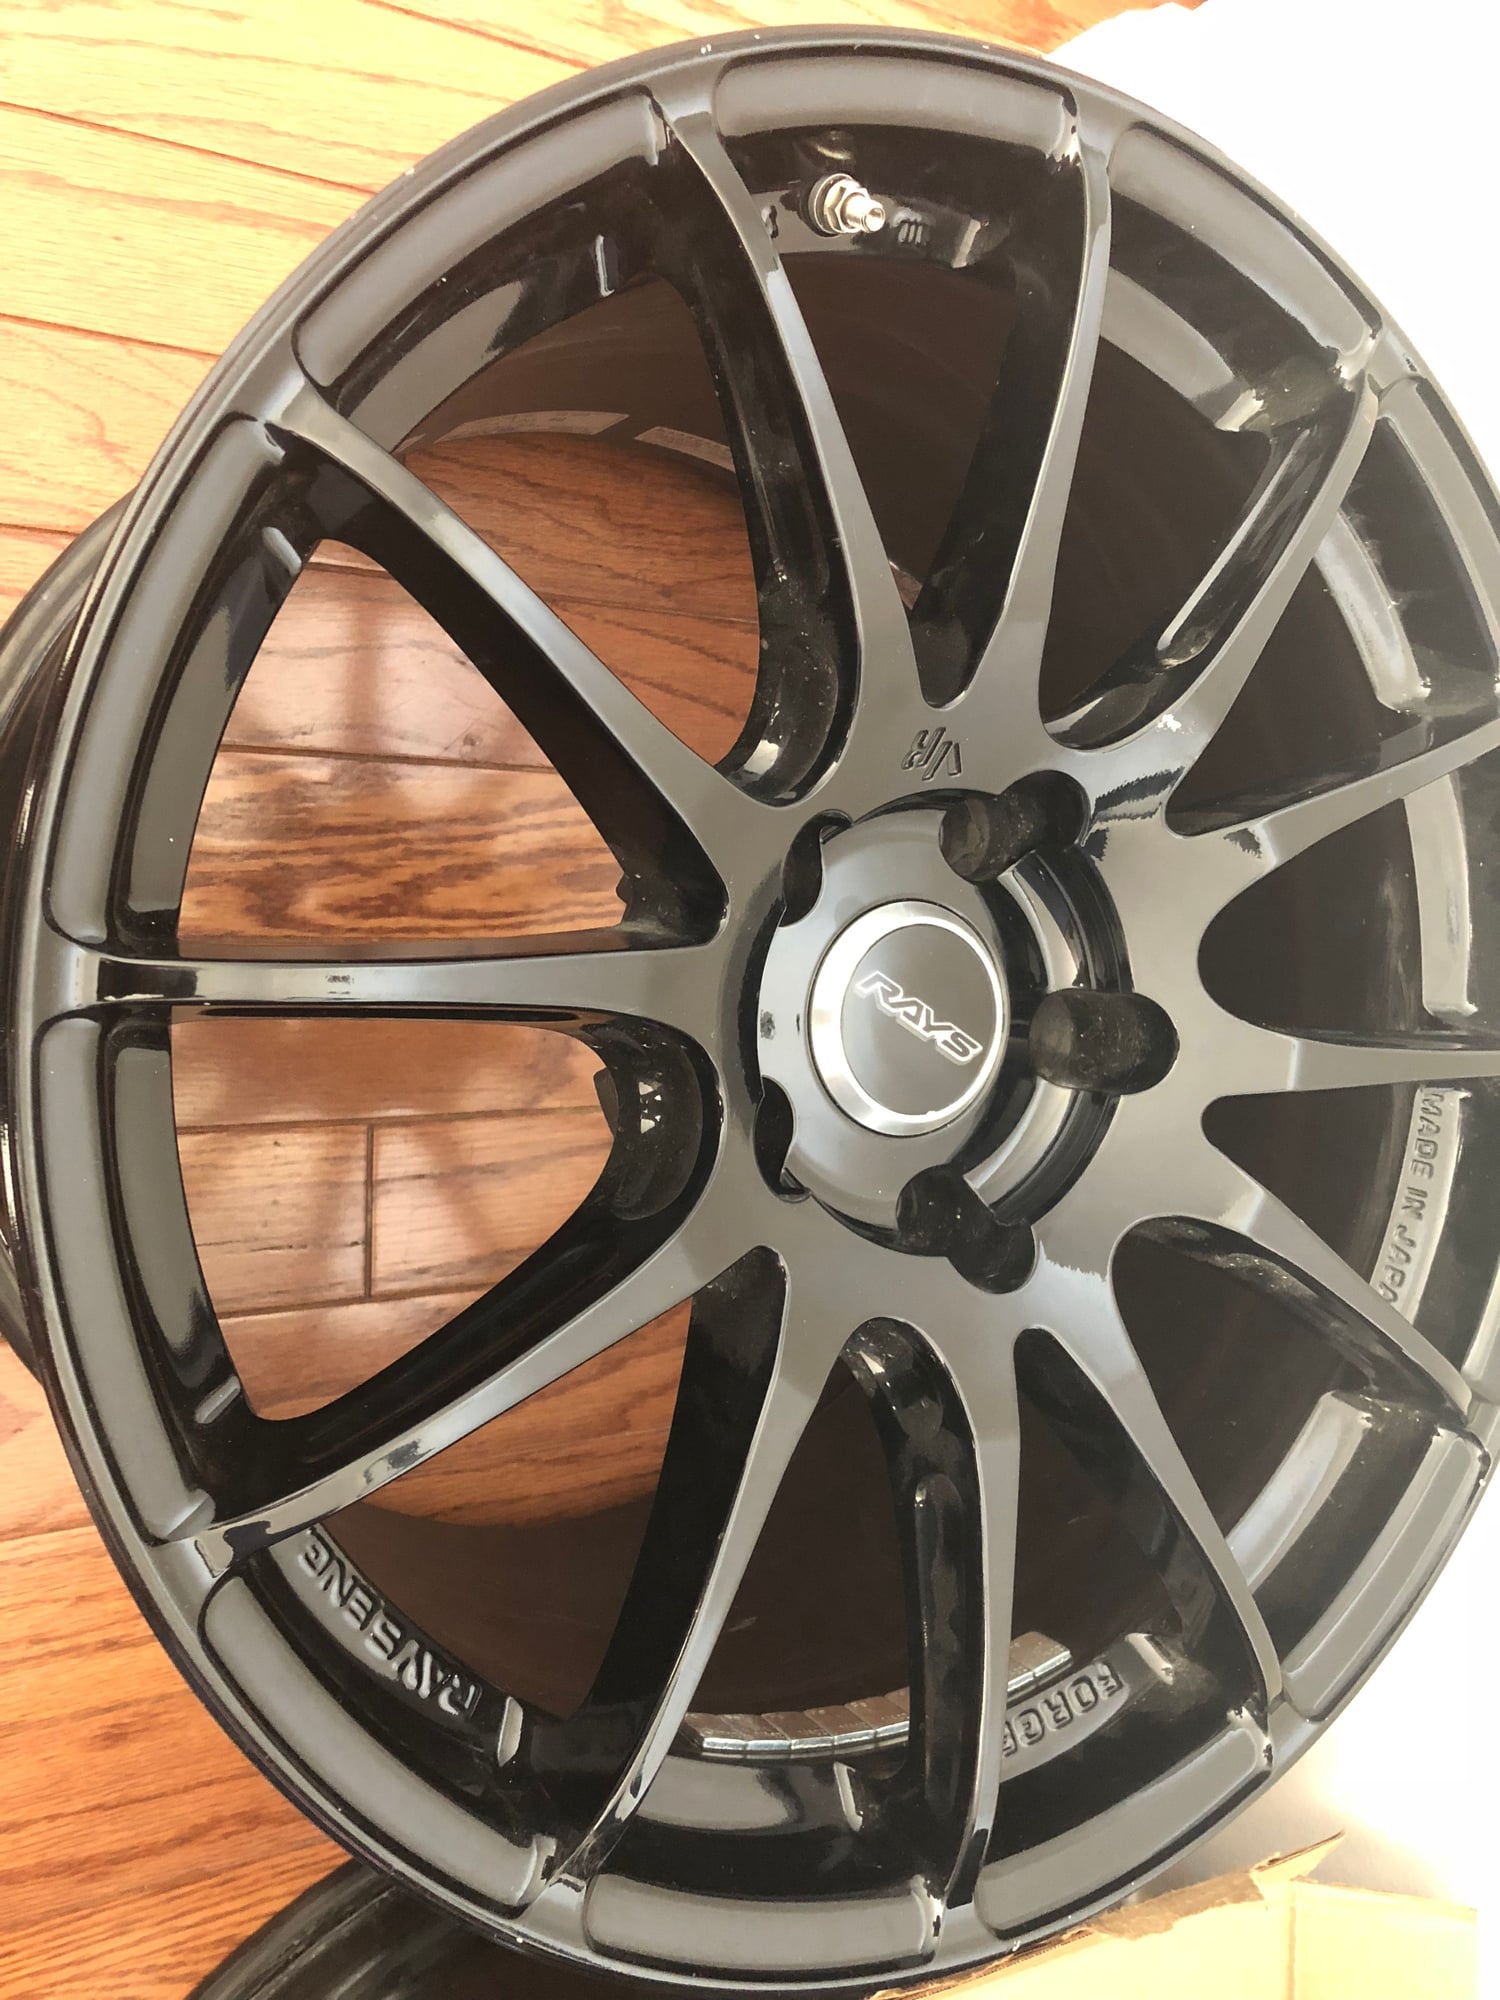 Wheels and Tires/Axles - WTB: Volk Racing Wheels G12 - Used - All Years Porsche 911 - Palos Verdes Estates, CA 90275, United States